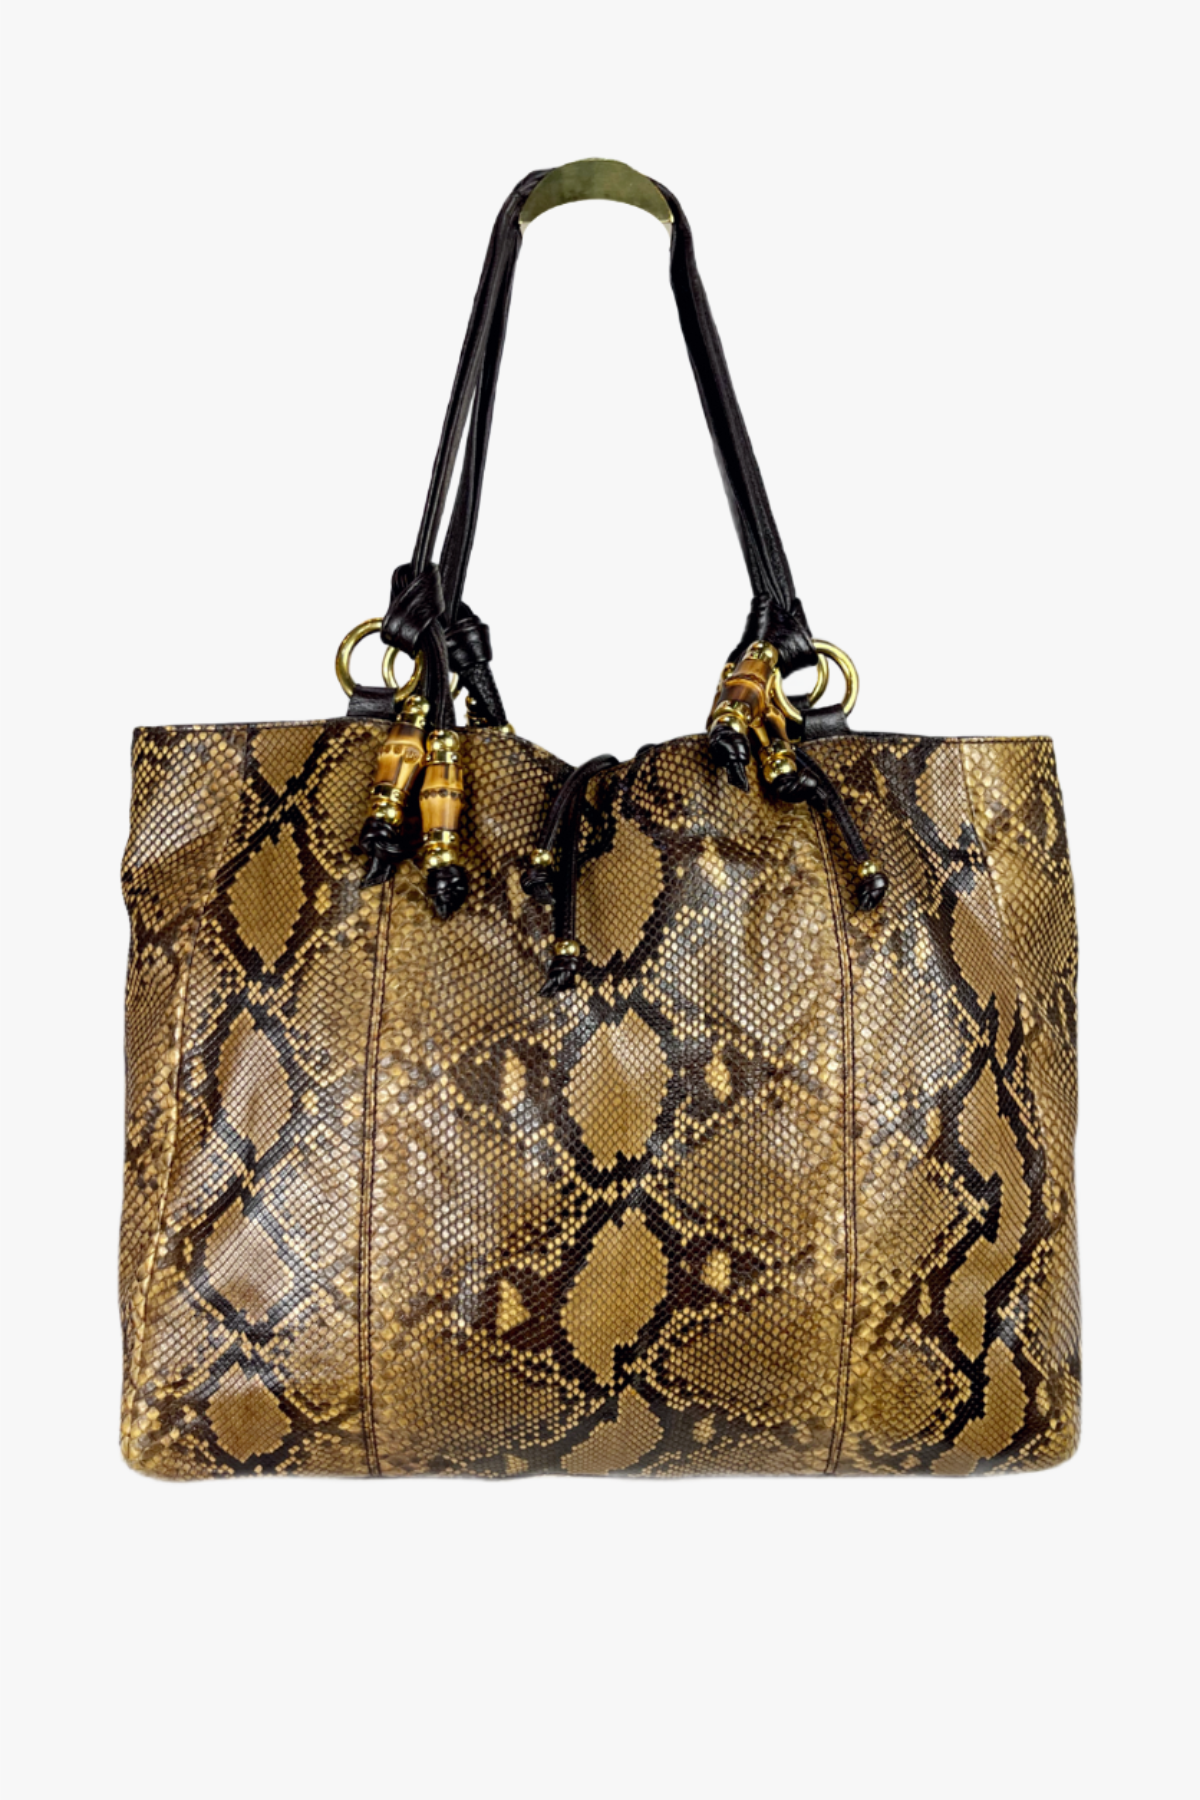 Gucci Genuine Python Tote w Bamboo Beaded Tassels Tote